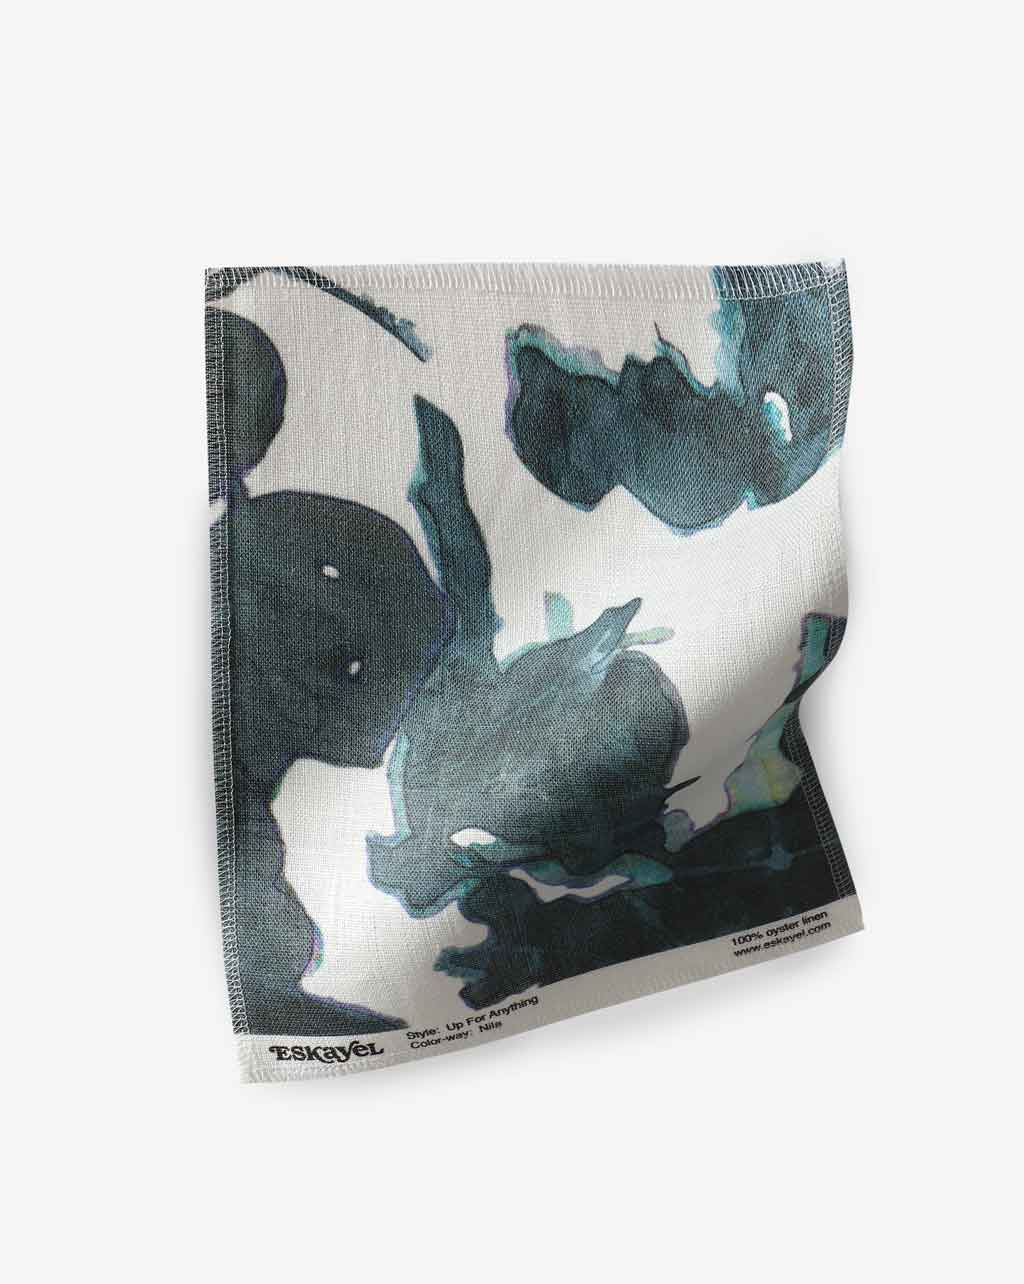 A Up For Anything Fabric with a botanical pattern in black and blue watercolor design